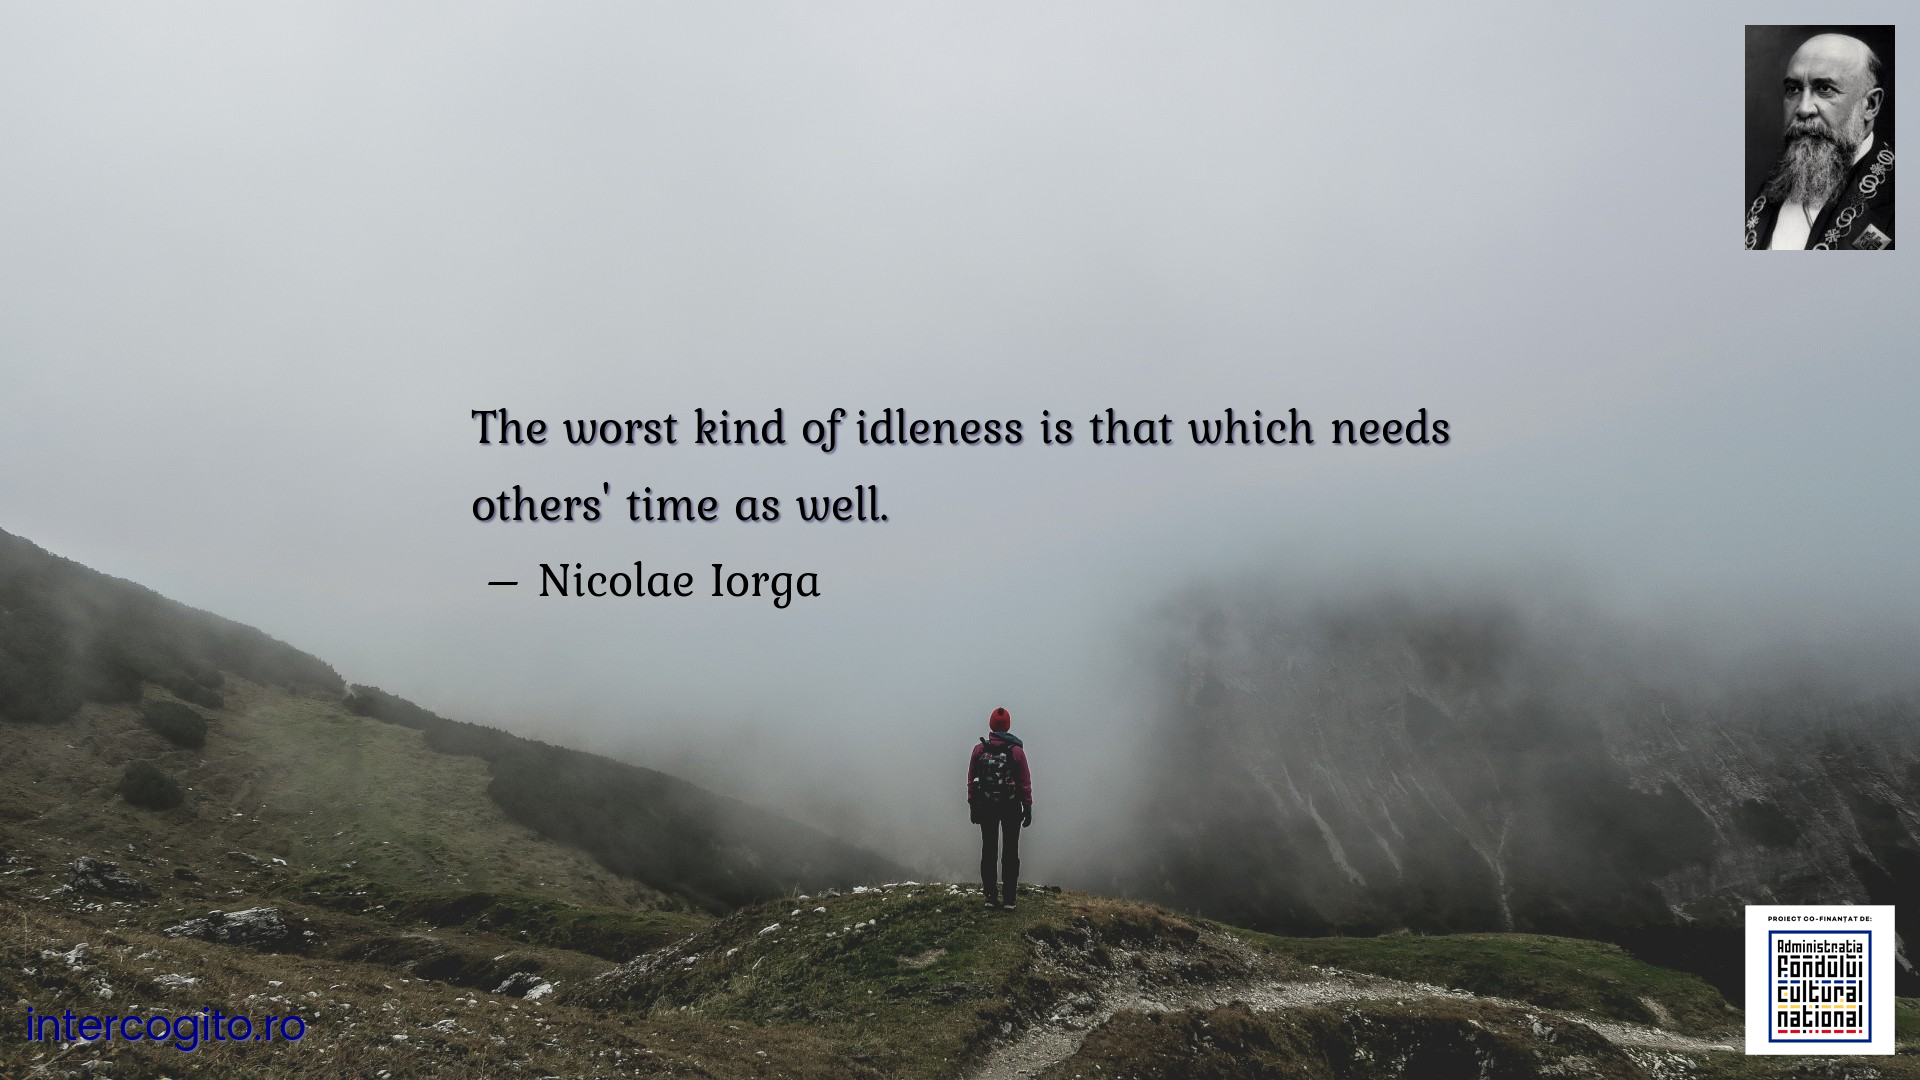 The worst kind of idleness is that which needs others' time as well.